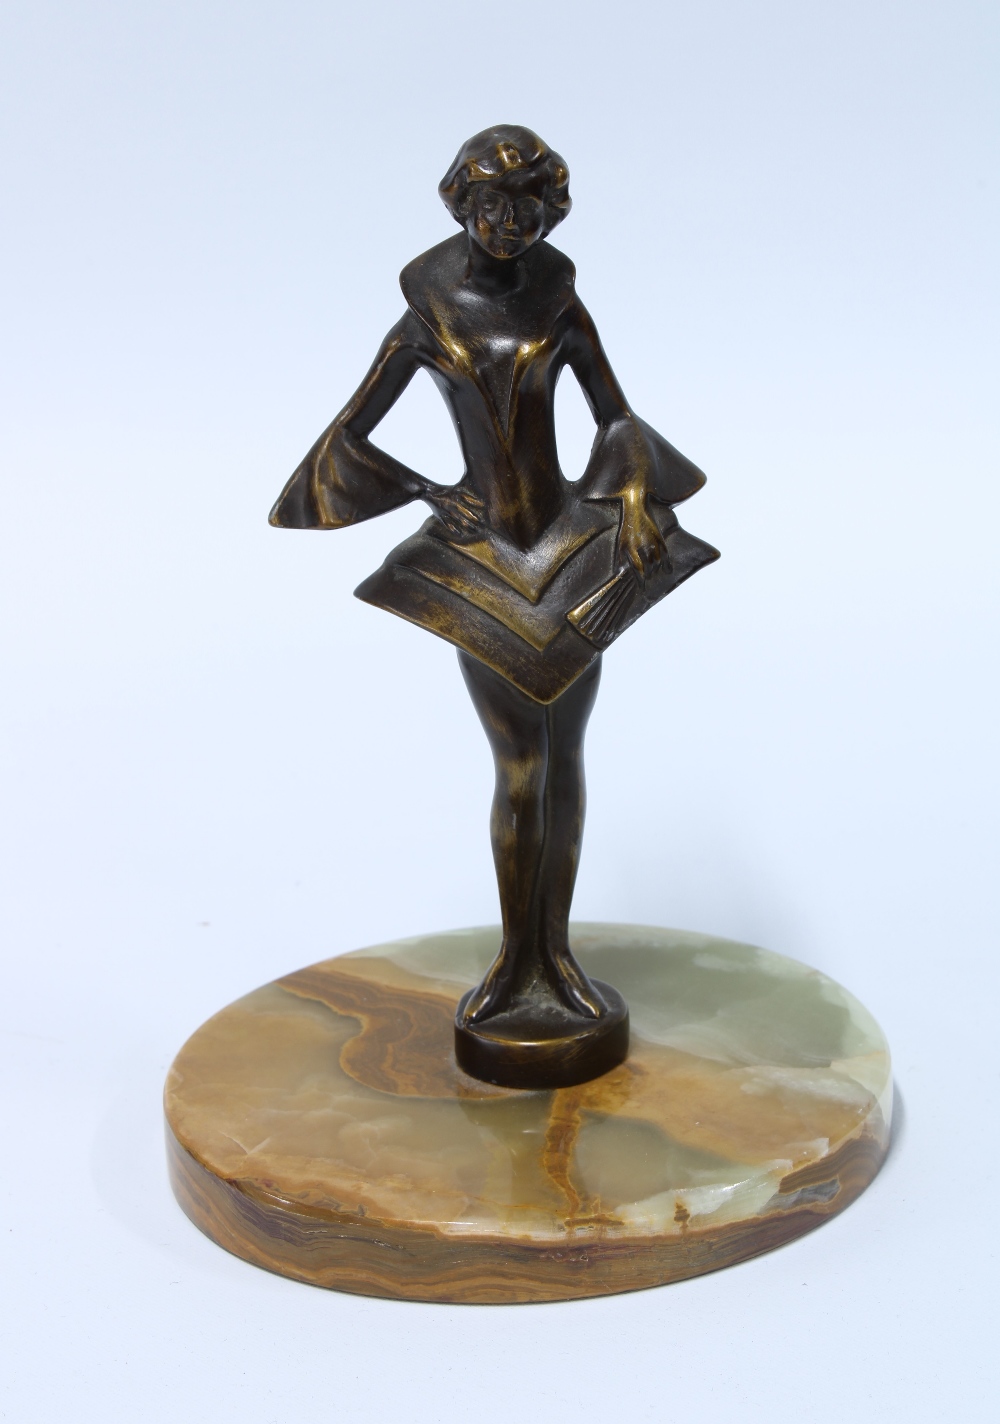 Art Deco style bronze patinated metal figure of a girl in stylistic dress, on a hardstone base, 15cm